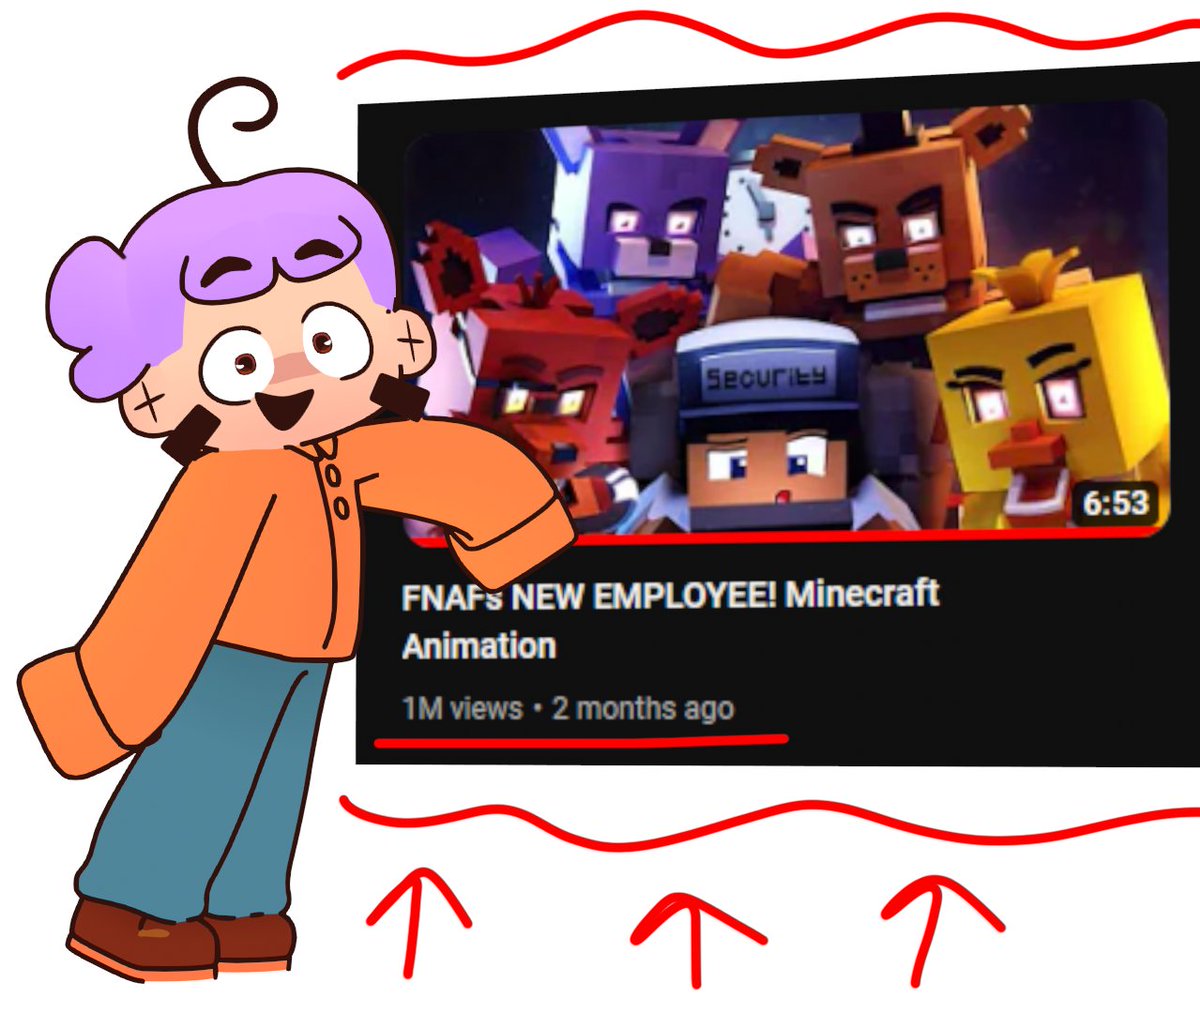 My newest Minecraft Animation Hit 1 MILLION VIEWS! 🥳🥳🥳 I honestly Can't believe it did as well as it has. Thank you all for enjoying the video, and I can't wait to make more! And another special thanks to those who helped me complete it!